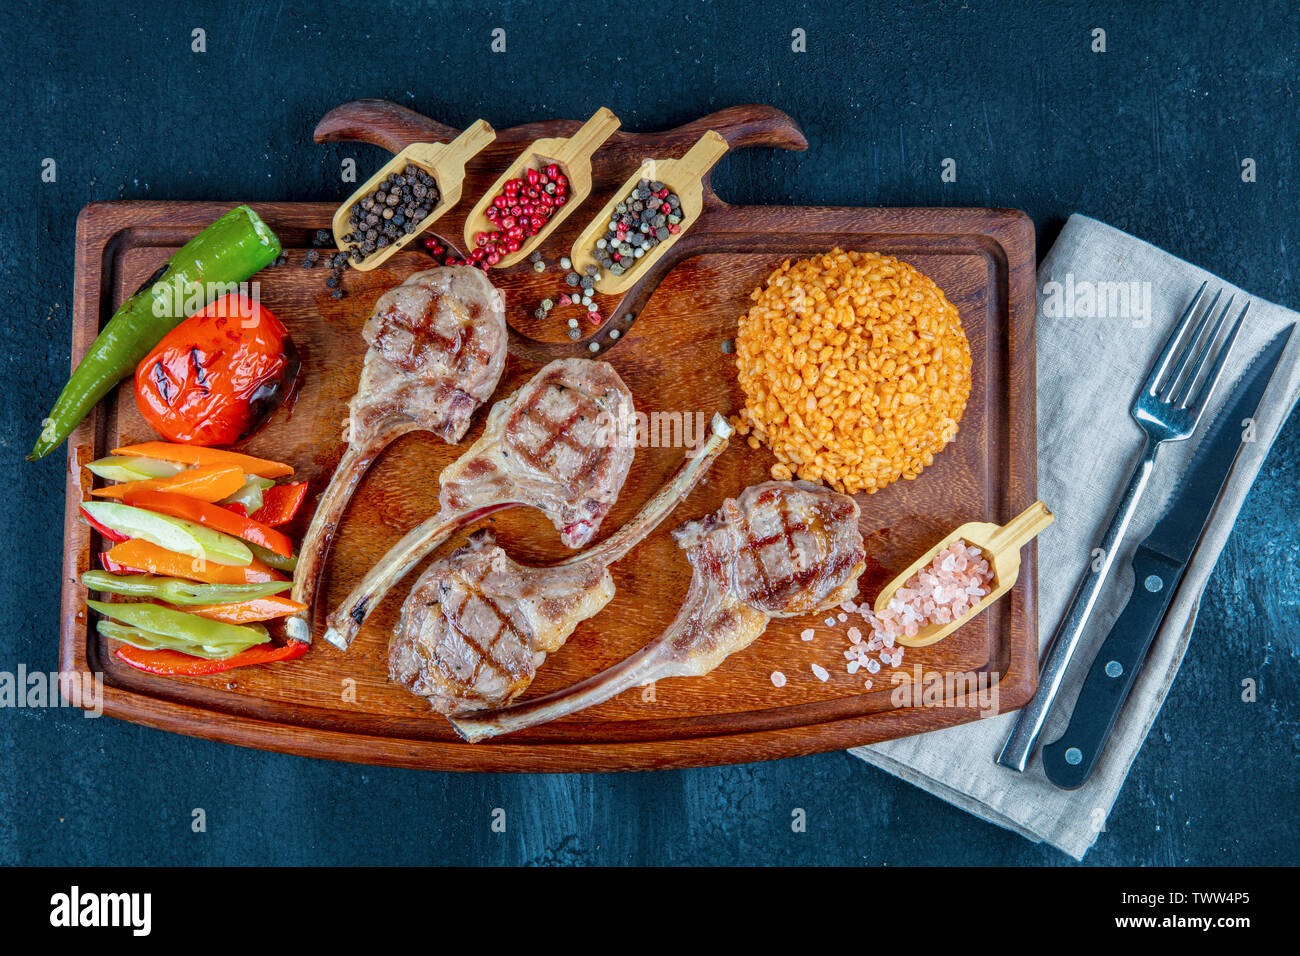 Lamb ribs grilled on cutting board with roasted vegetables. Top view Copy space Wooden background. Halal restaurant concept. Stock Photo